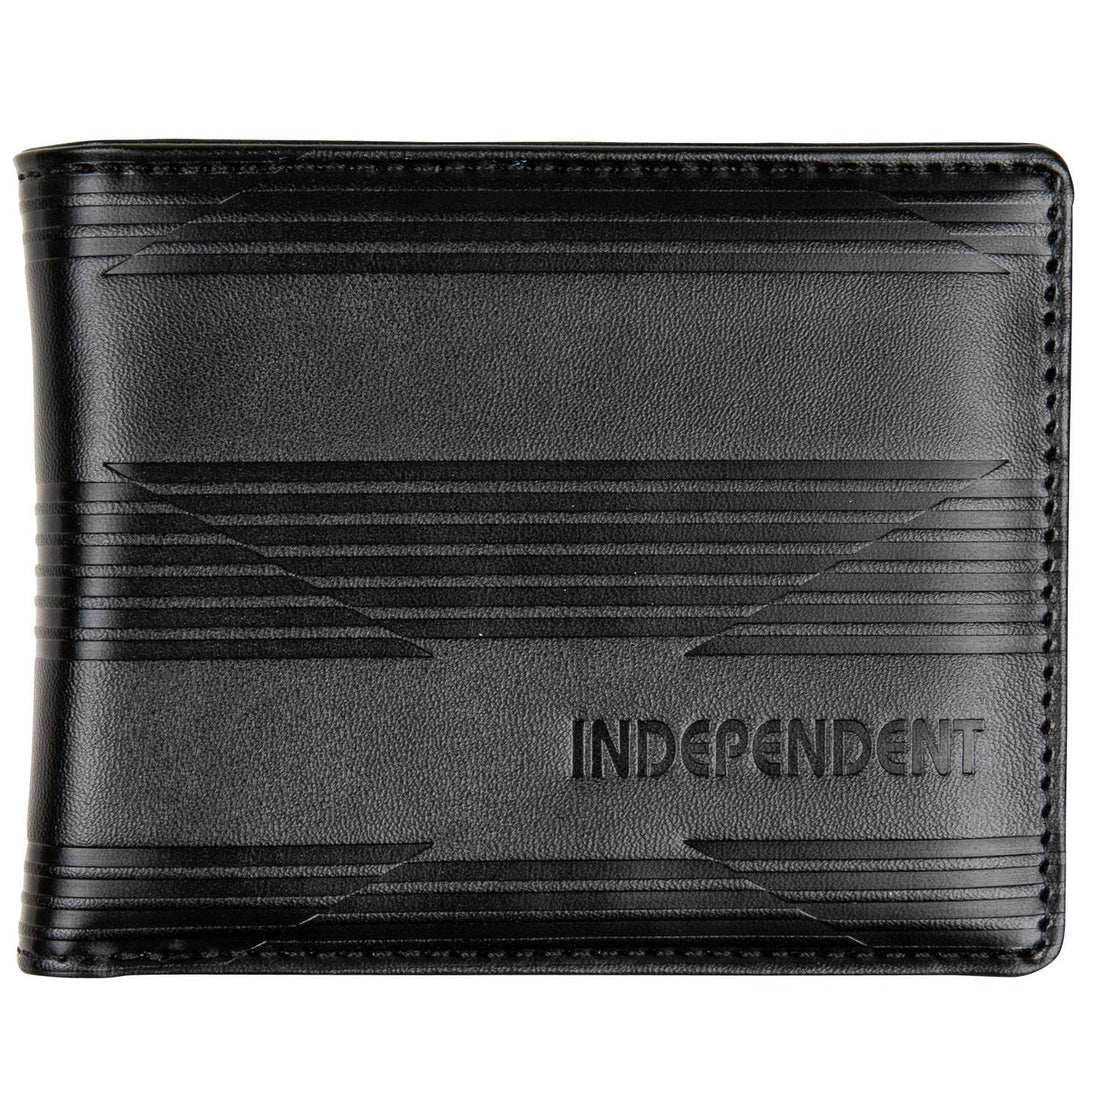 Independent Wired Wallet